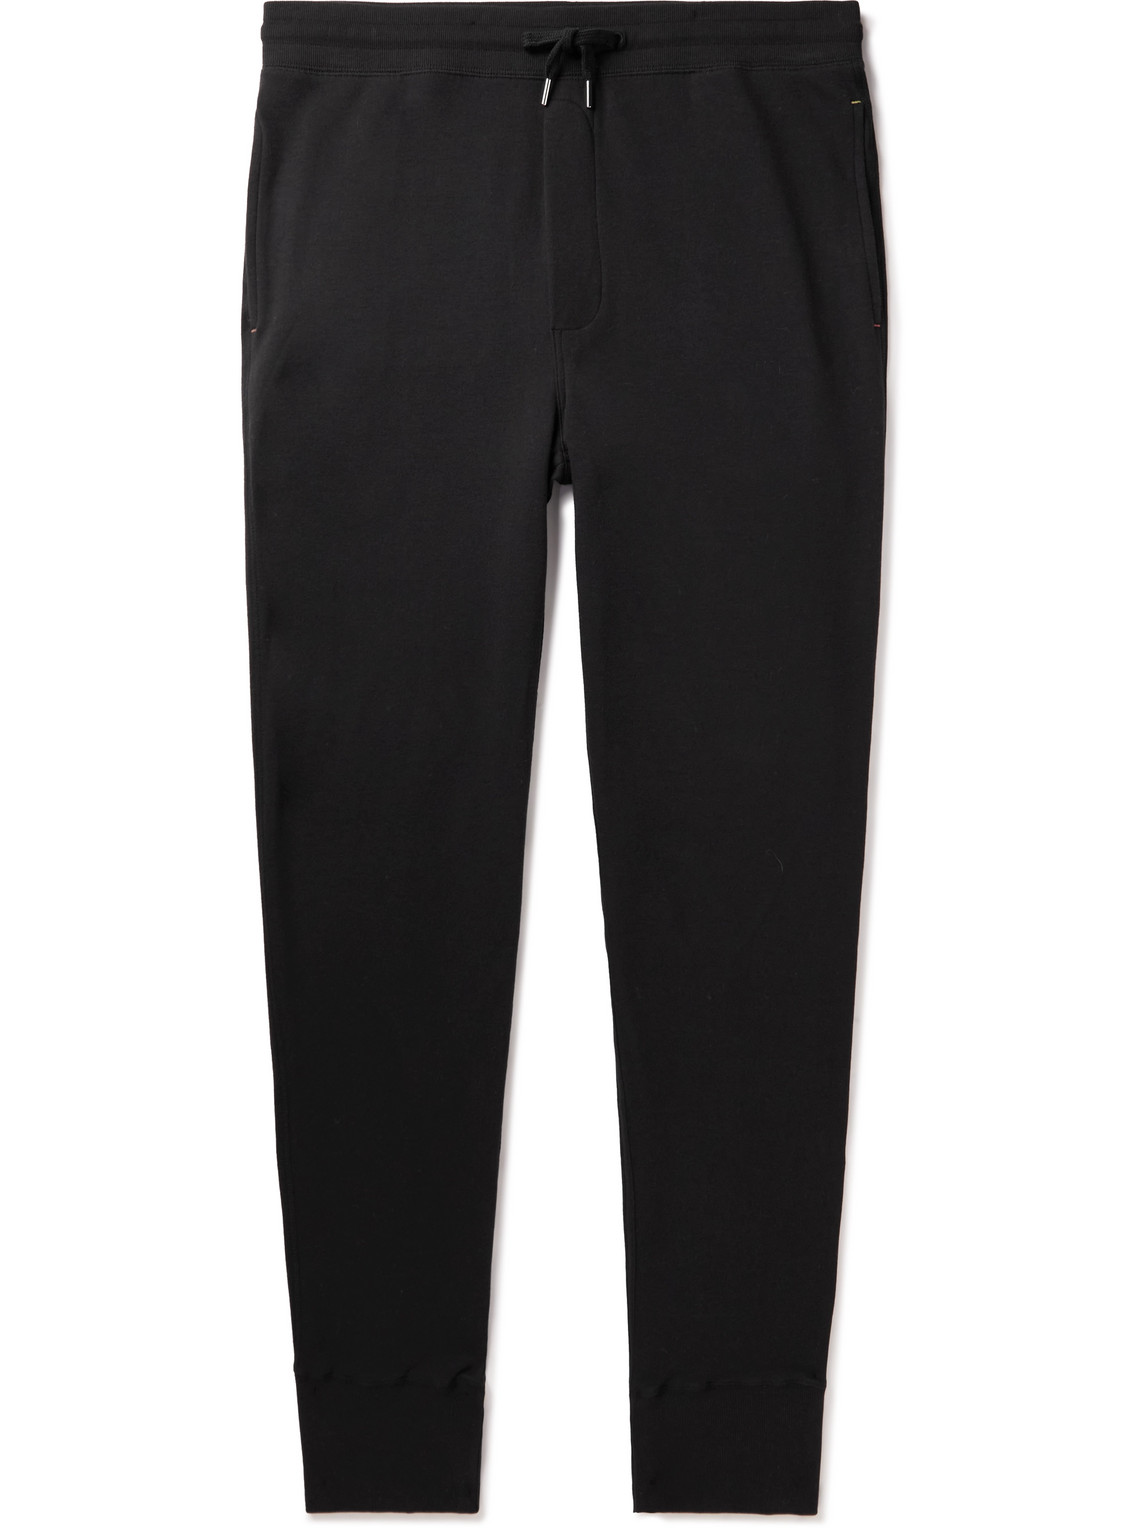 Paul Smith Tapered Cotton and Modal-Blend Jersey Pyjama Trousers